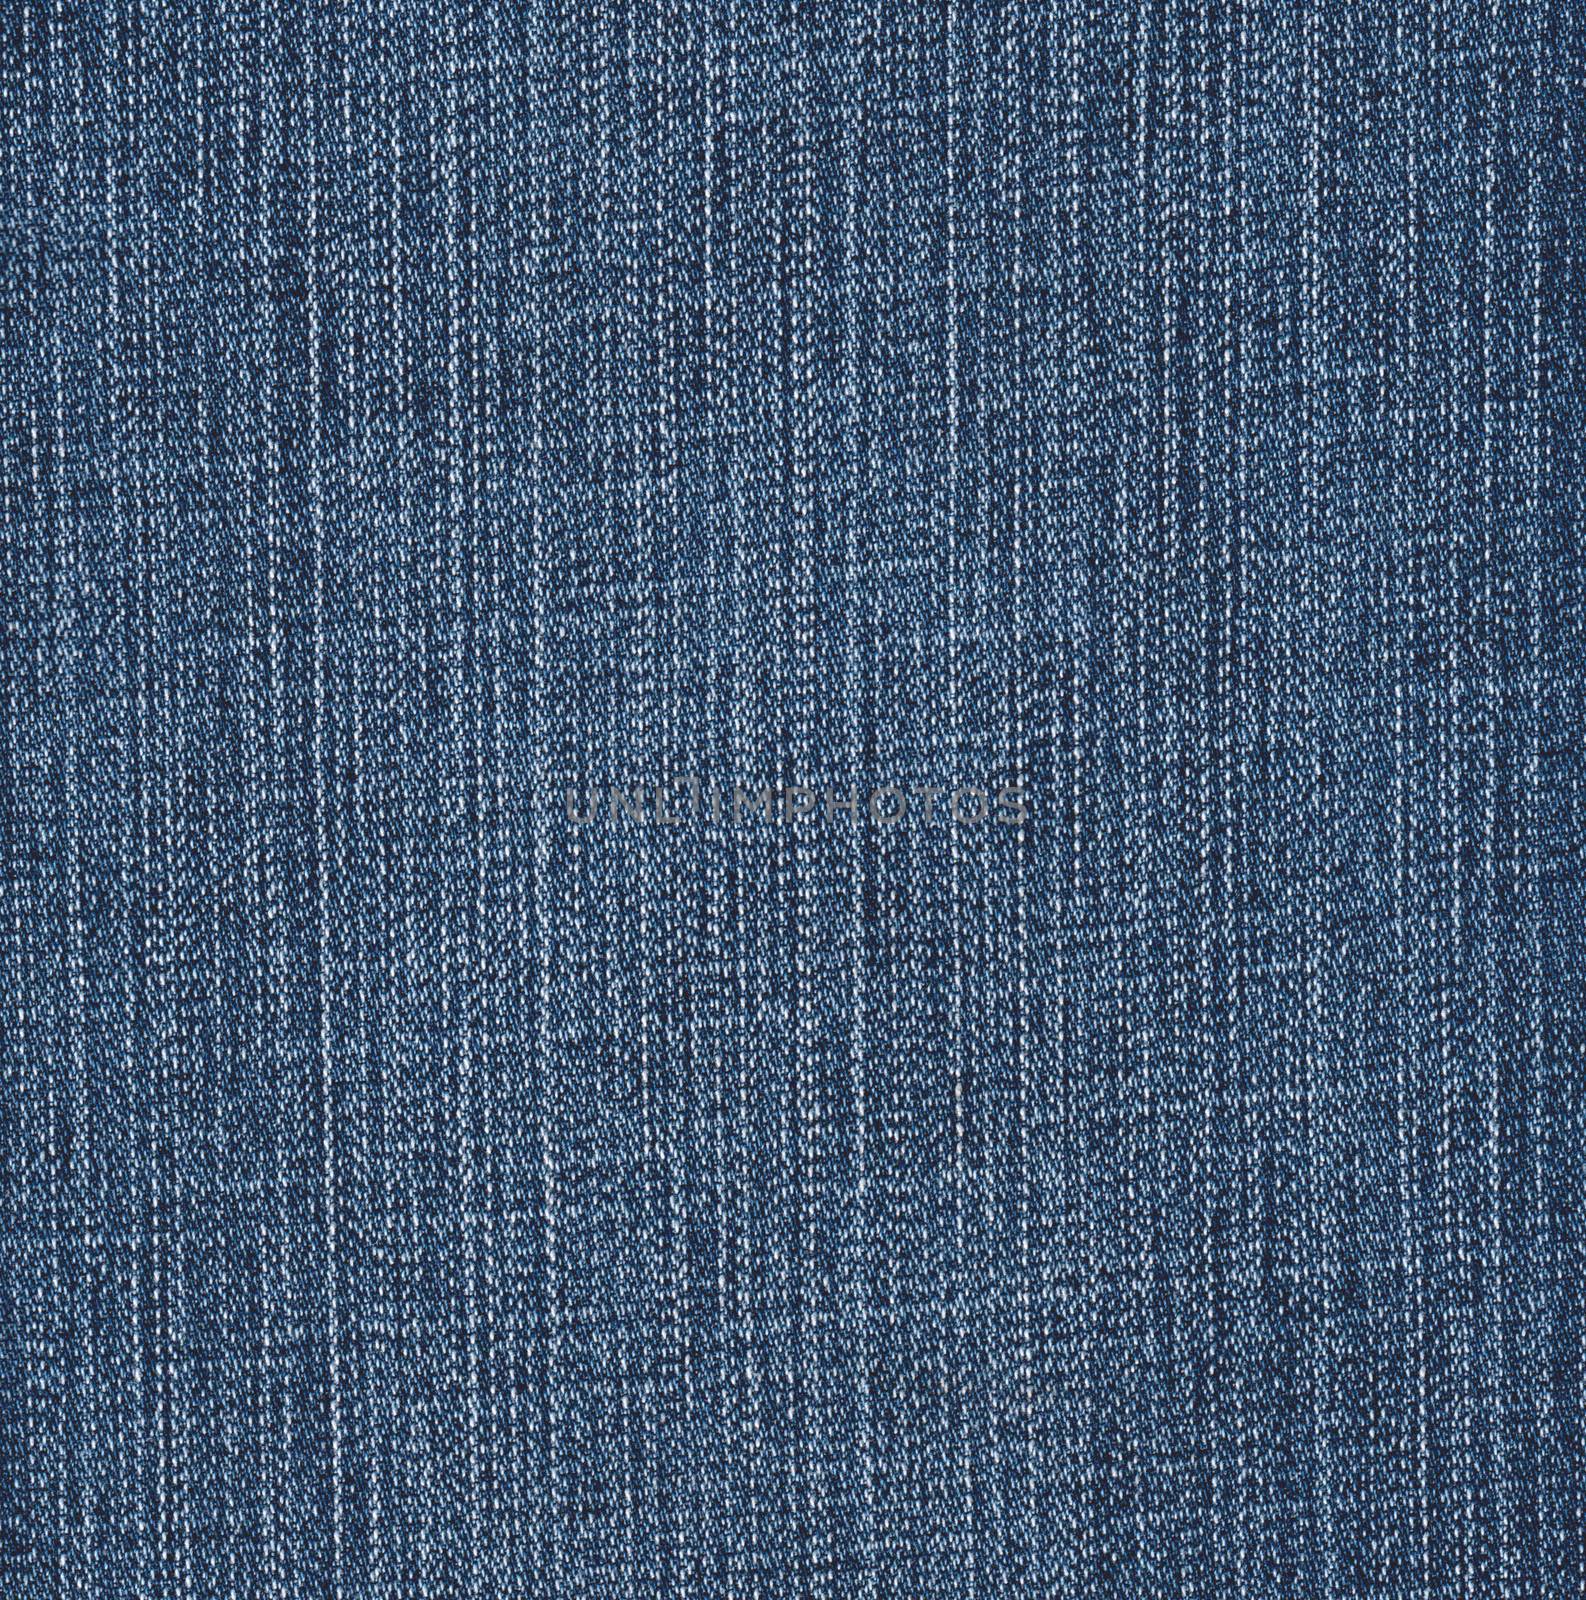 Real blue jeans denim texture and background